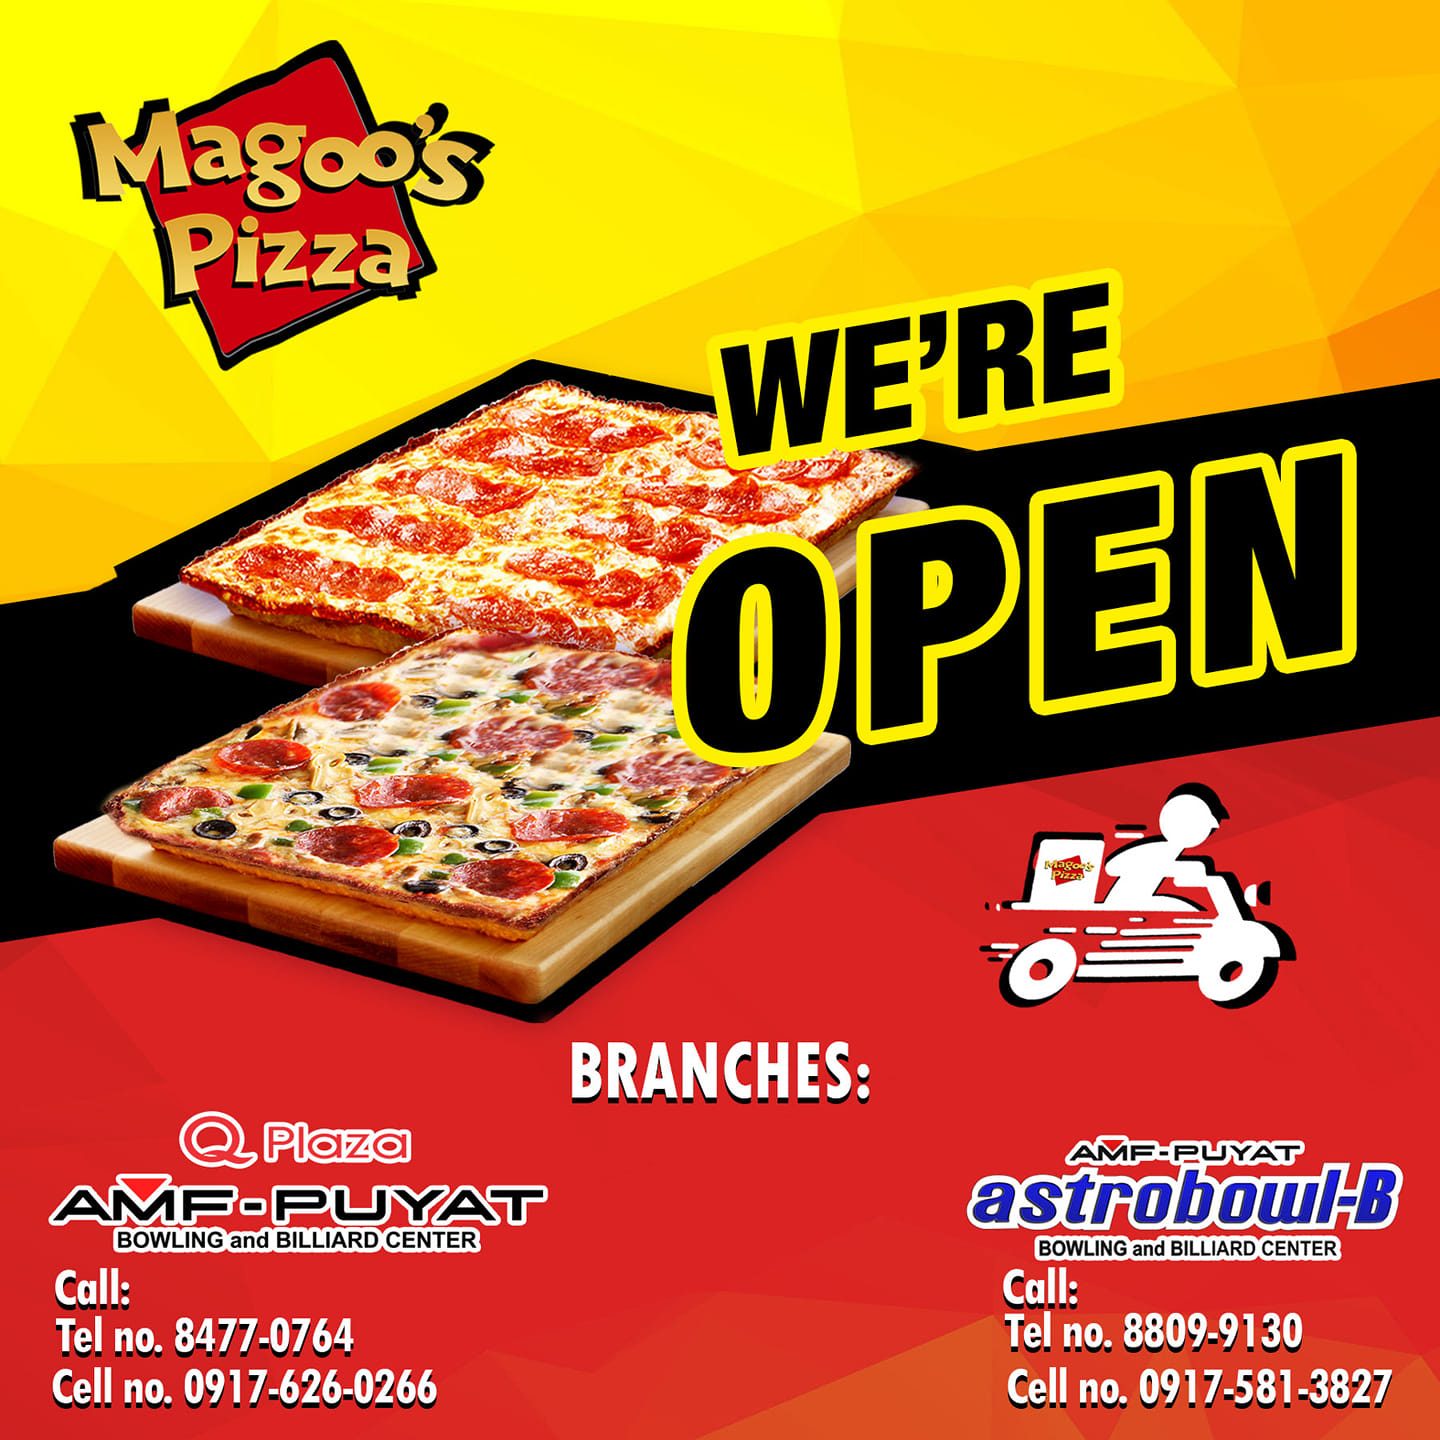 Magoo’s Pizza reopens two branches in Metro Manila